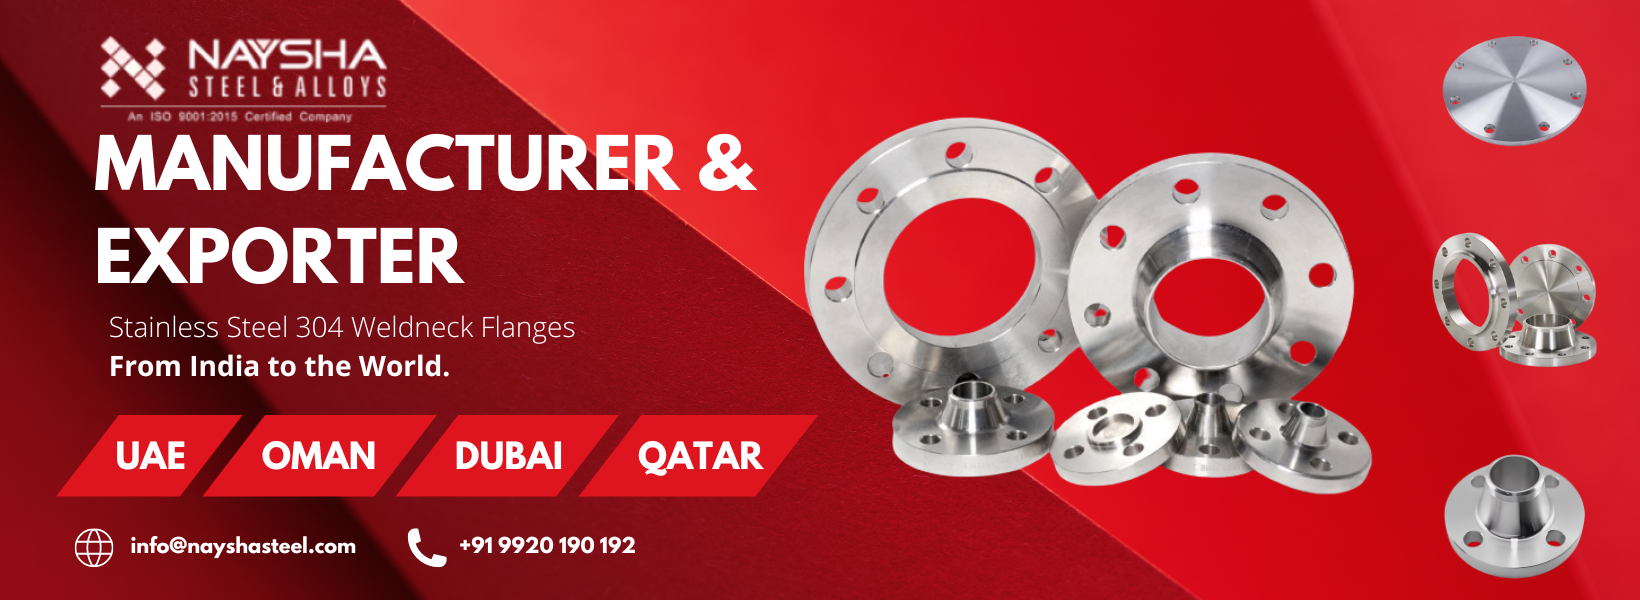 Stainless Steel 304 Weld Neck Flanges Manufacturer and Exporter in UAE